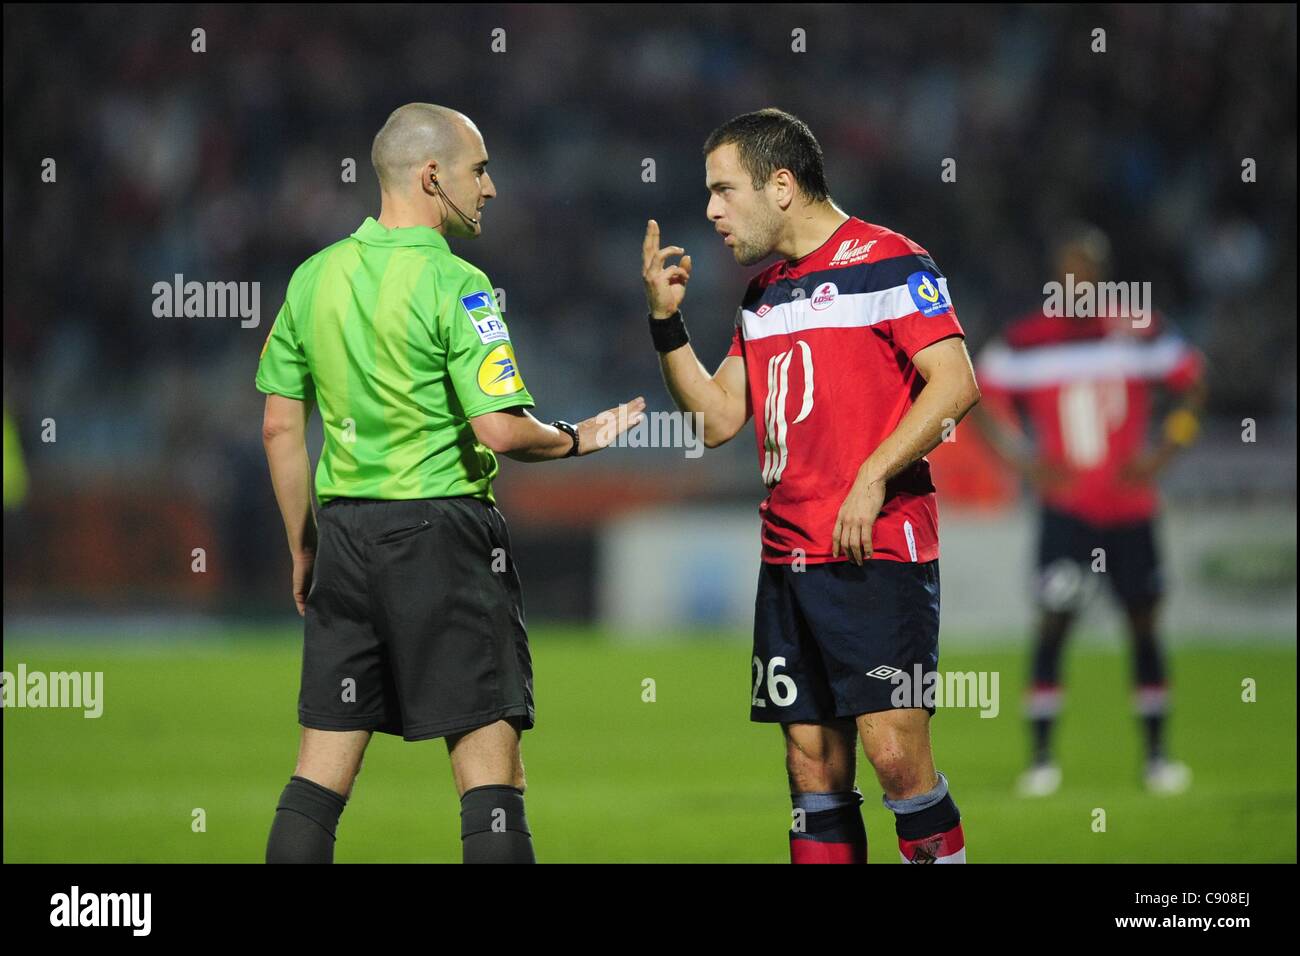 05.11.2011. French league 1 Football. Lille versus Evian. Joe Cole Lille  and referee Benoit Millot discuss a call that Cole disagreed with Stock  Photo - Alamy